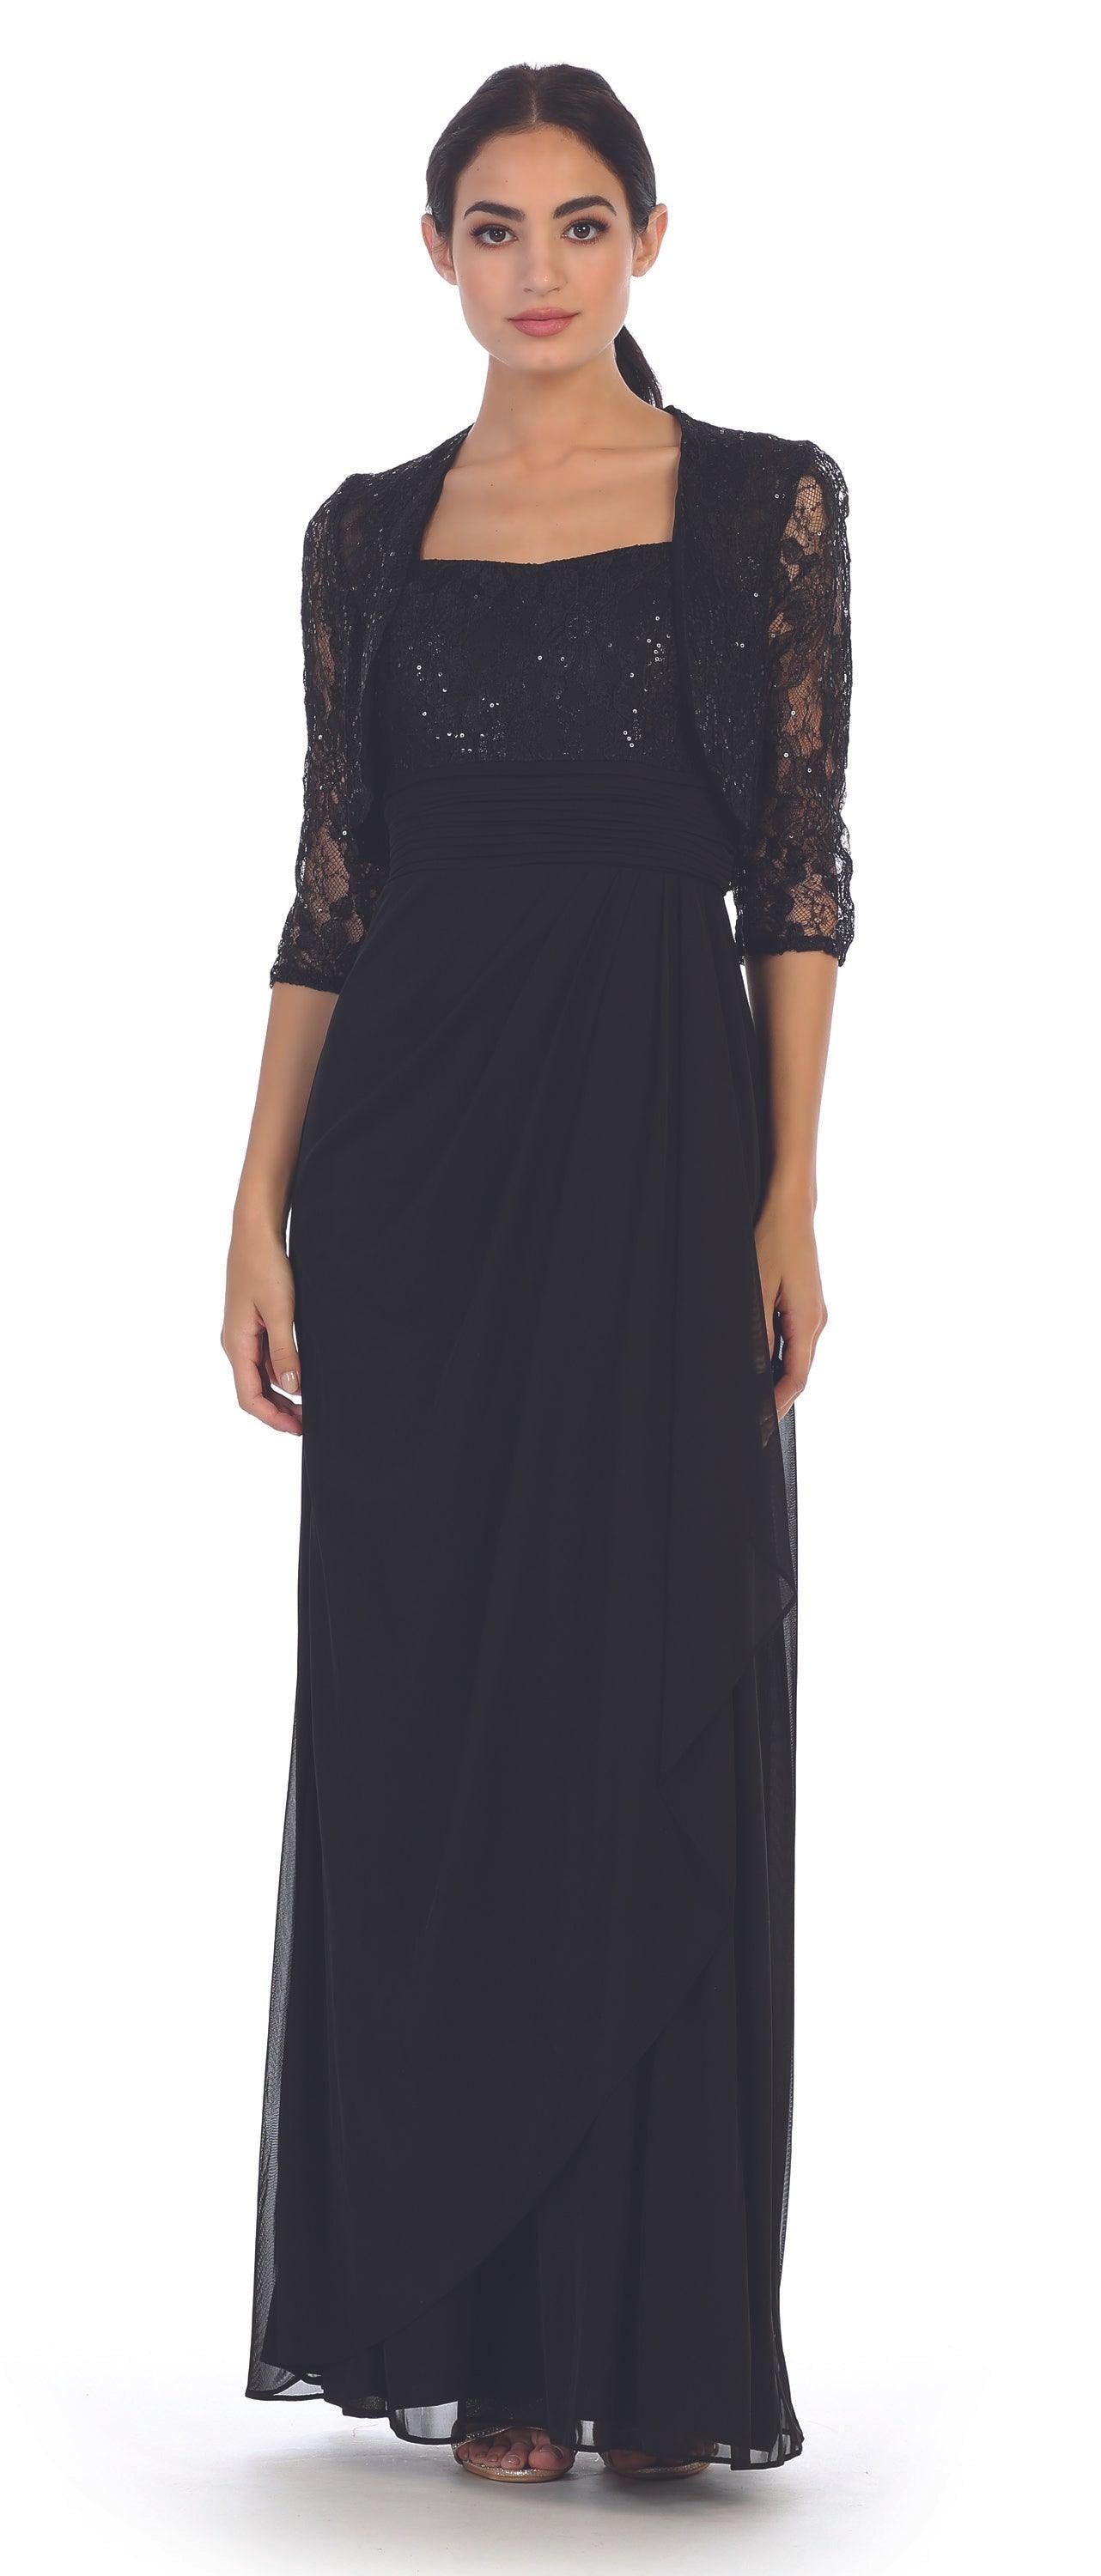 Long Mother of the Bride Lace Chiffon Jacket Dress - The Dress Outlet